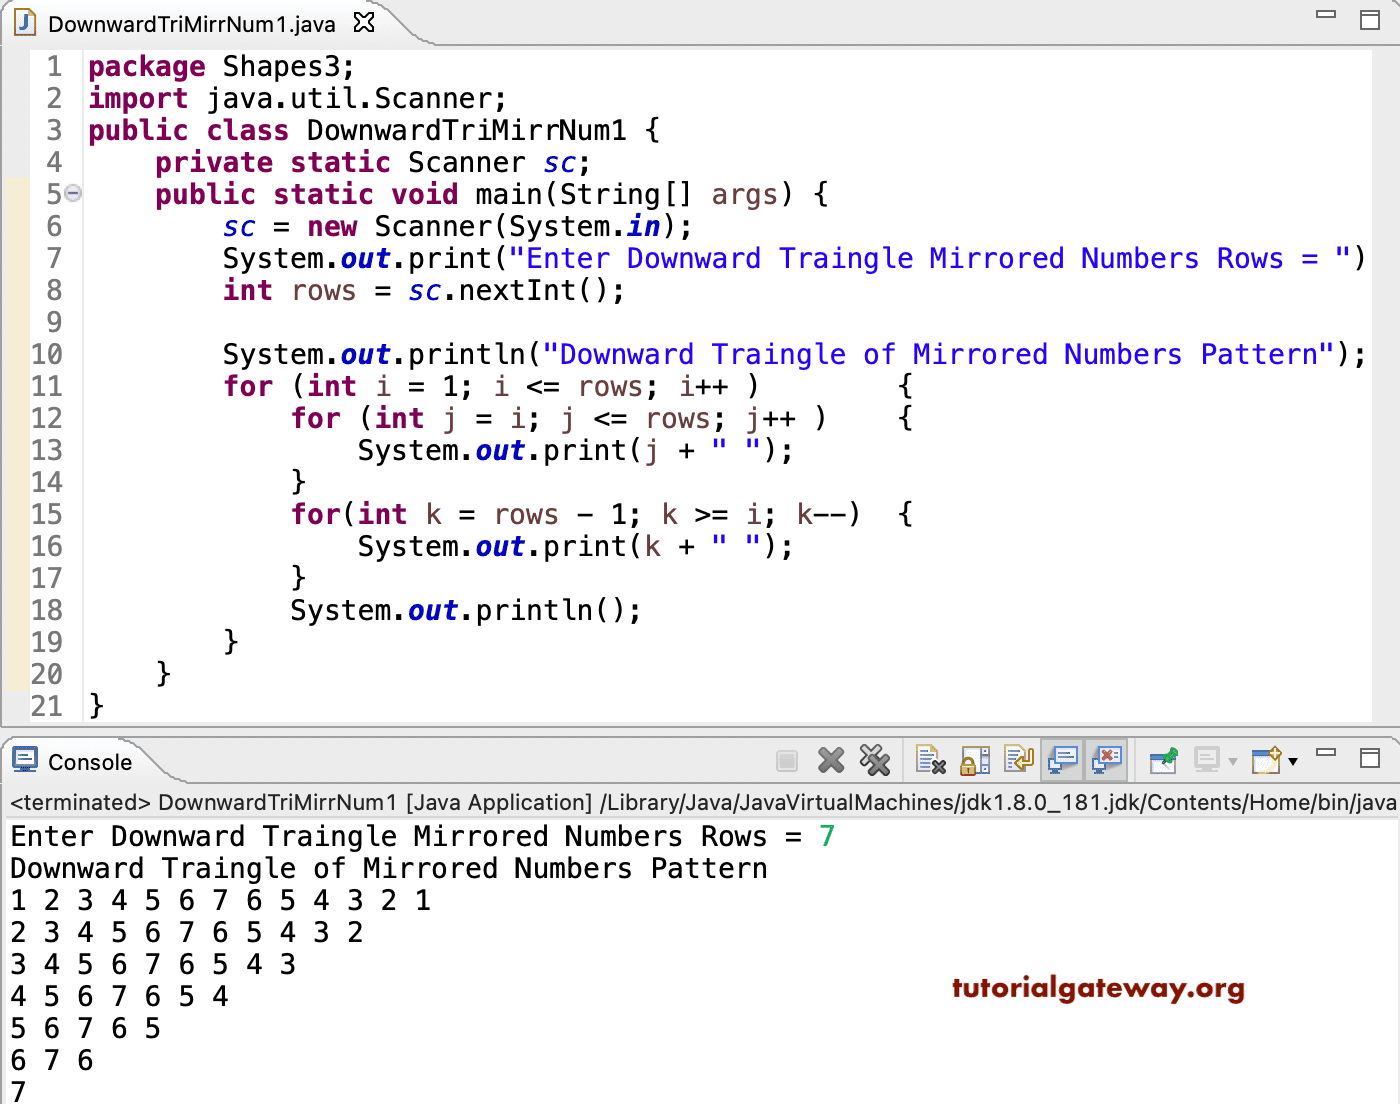 Java Program to Print Downward Triangle Mirrored Numbers Pattern